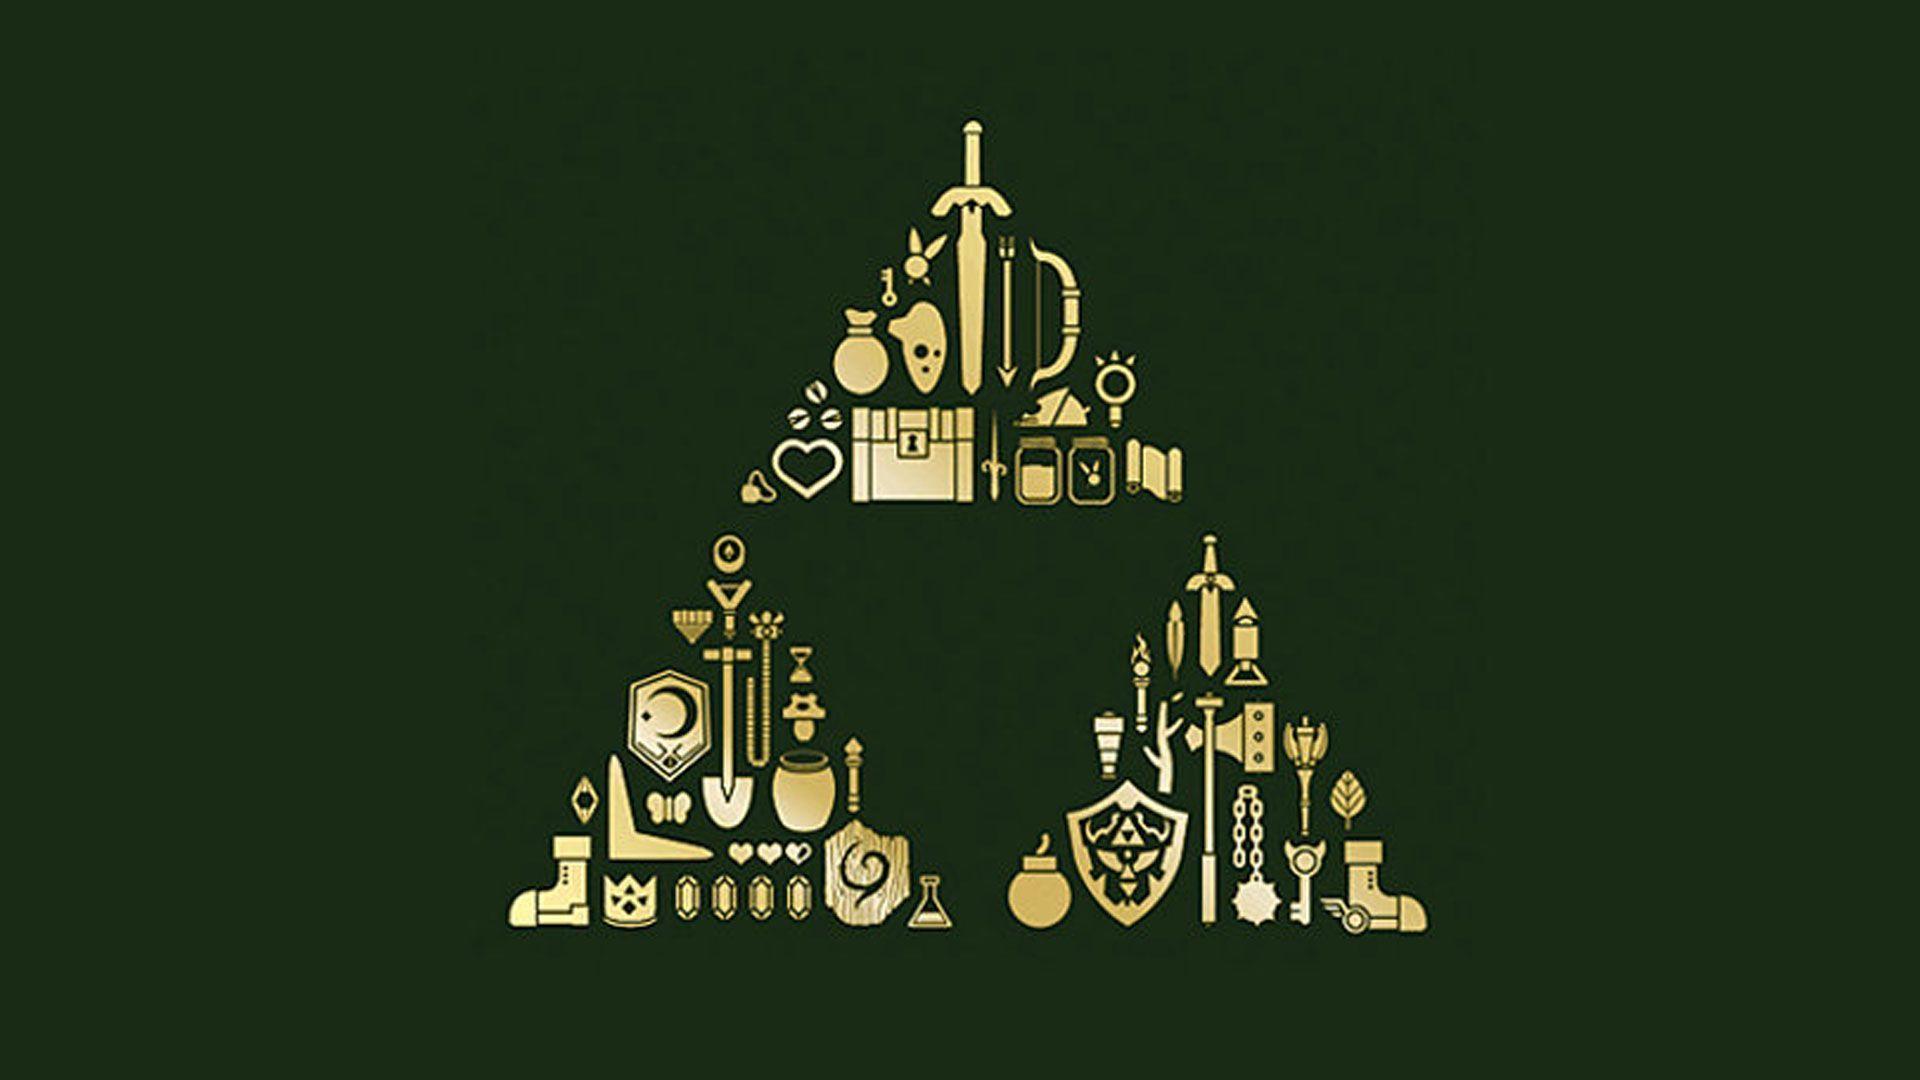 All of the items from Ocarina made into the shape of the triforce